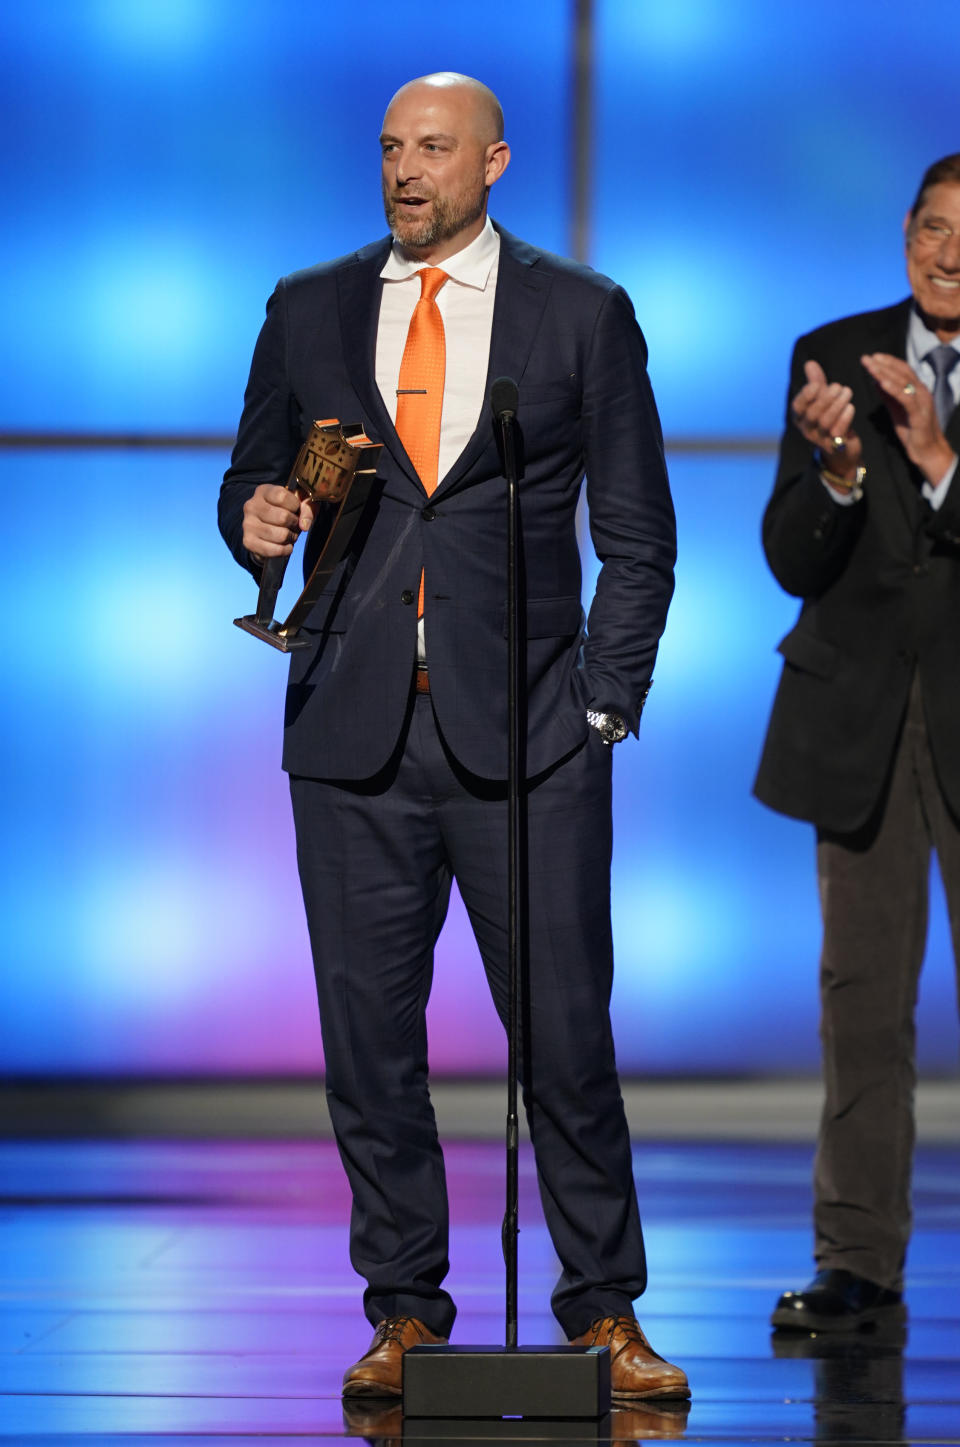 Coach of the Chicago Bears Matt Nagy accepts the award for AP coach of the year at the 8th Annual NFL Honors at The Fox Theatre on Saturday, Feb. 2, 2019, in Atlanta. (Photo by Paul Abell/Invision for NFL/AP Images)